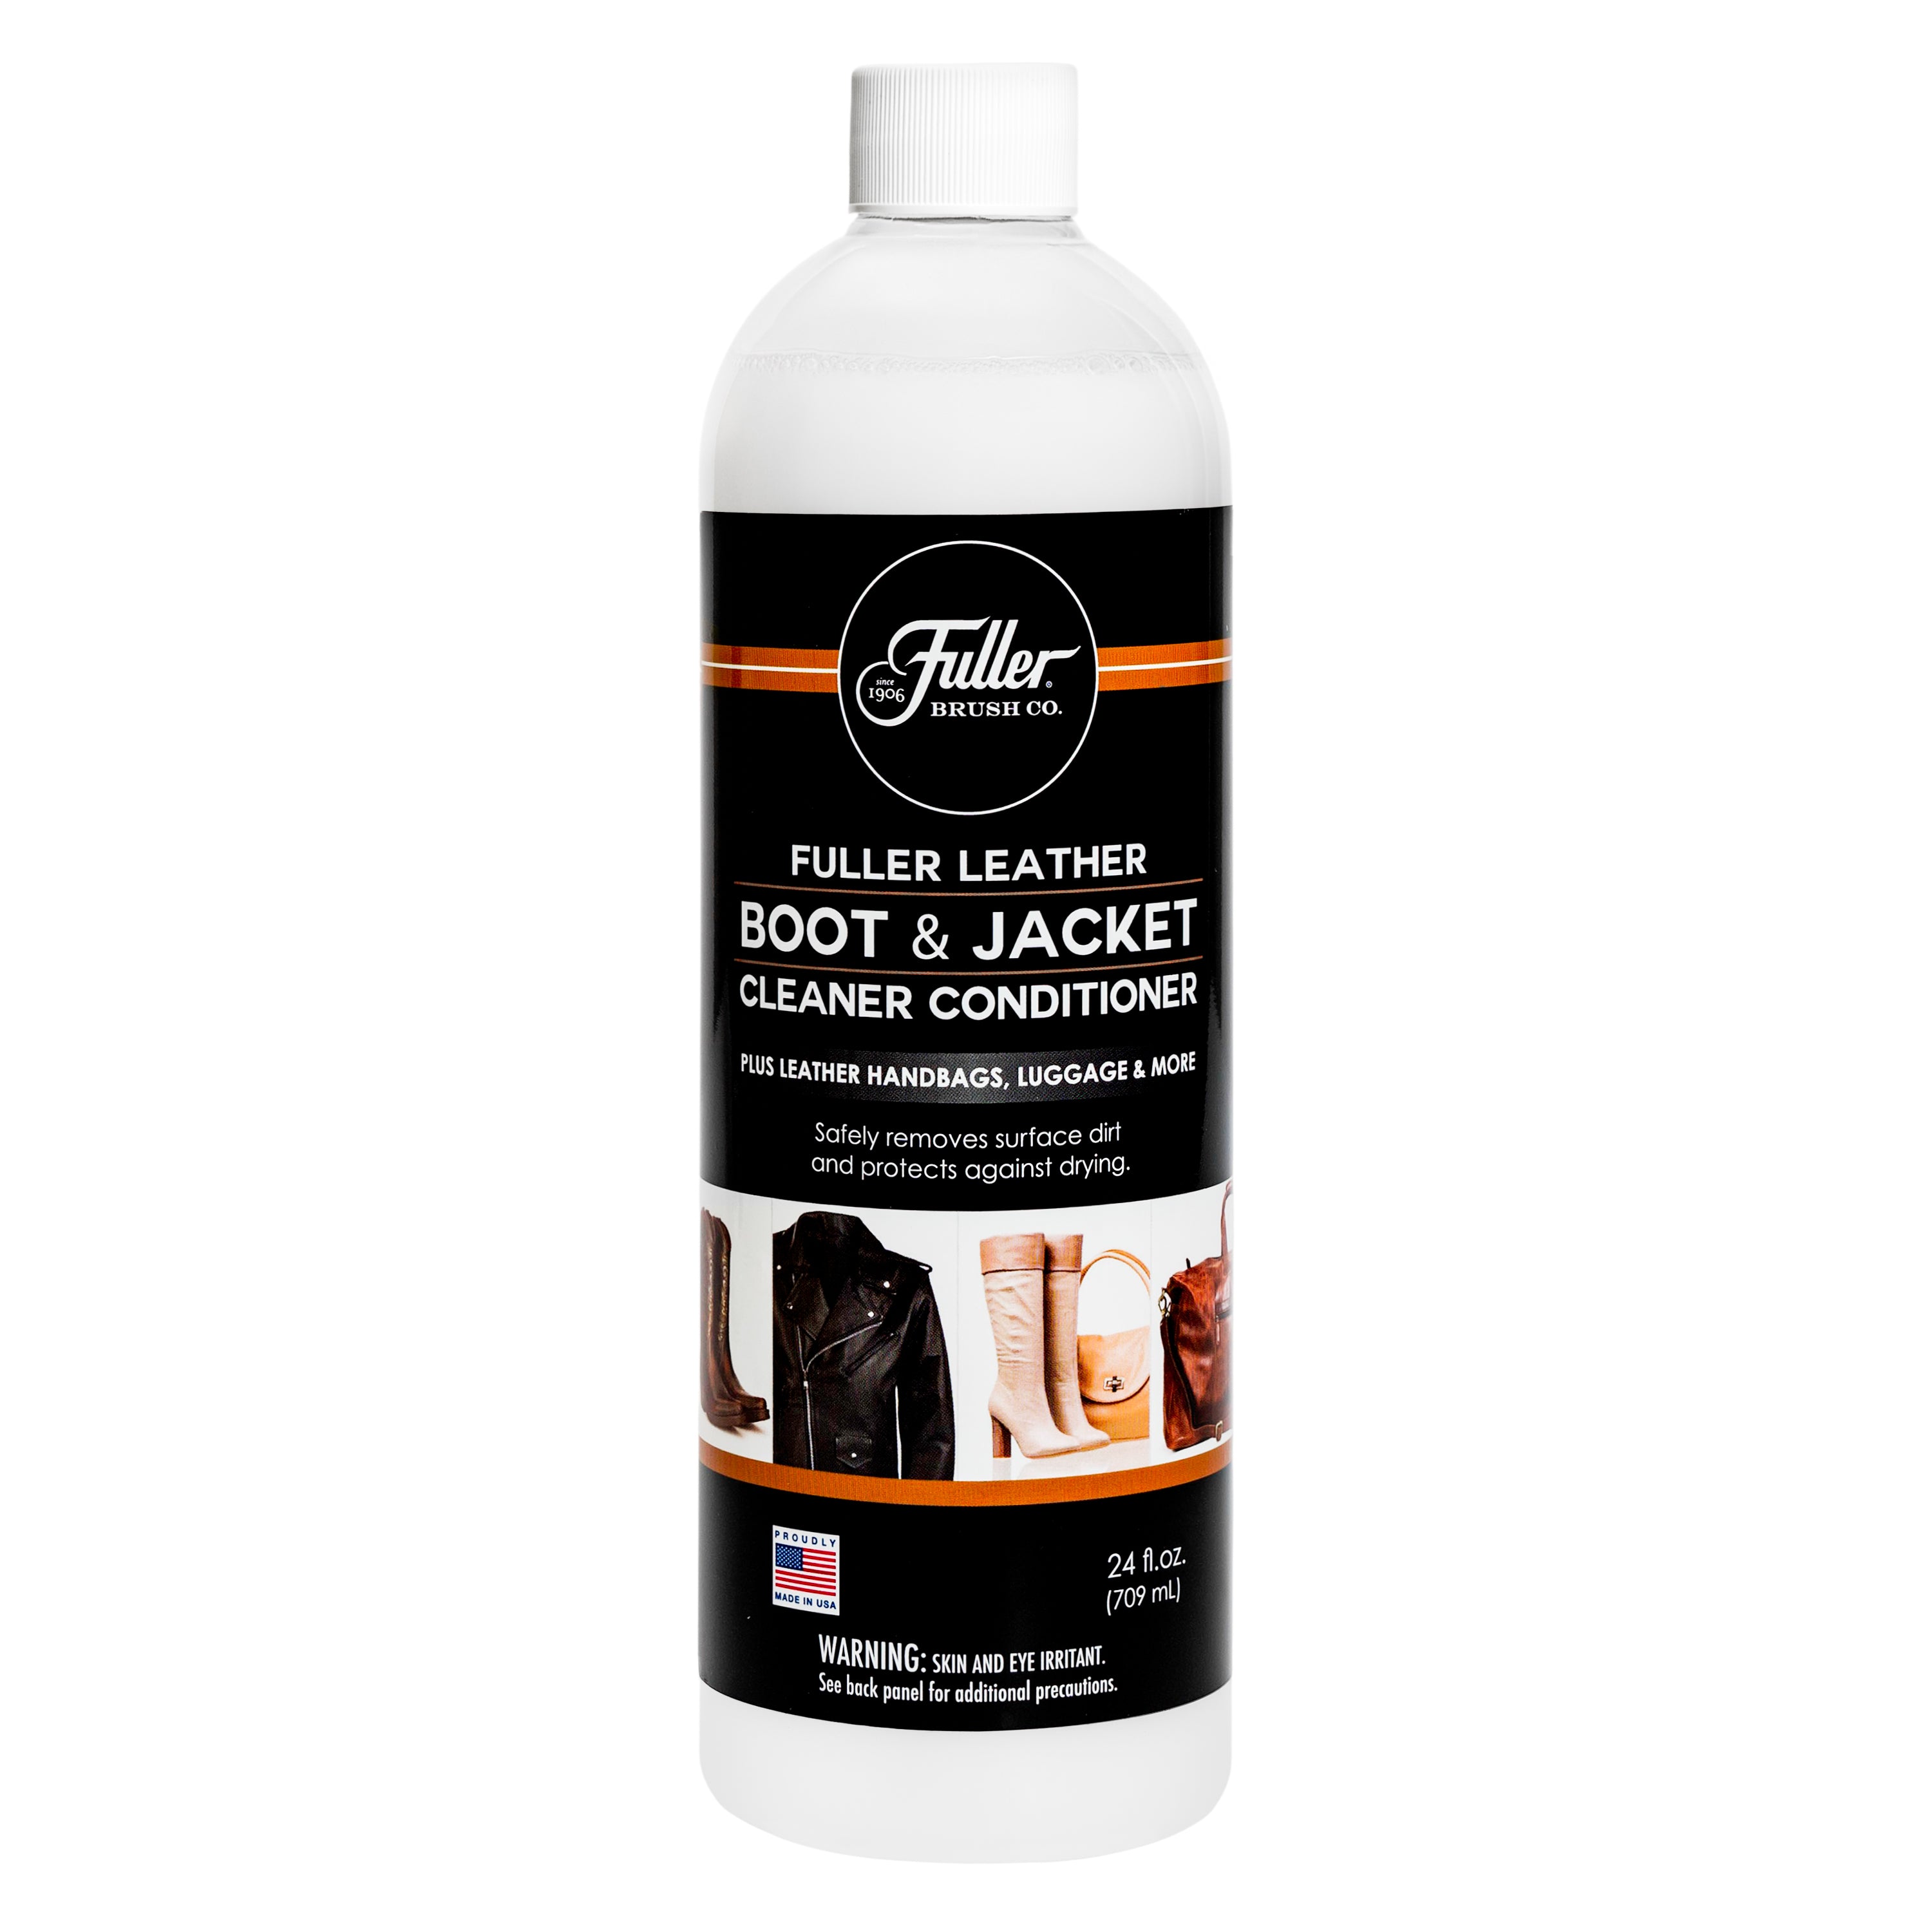 Fuller Leather Boot & Jacket Cleaner Conditioner